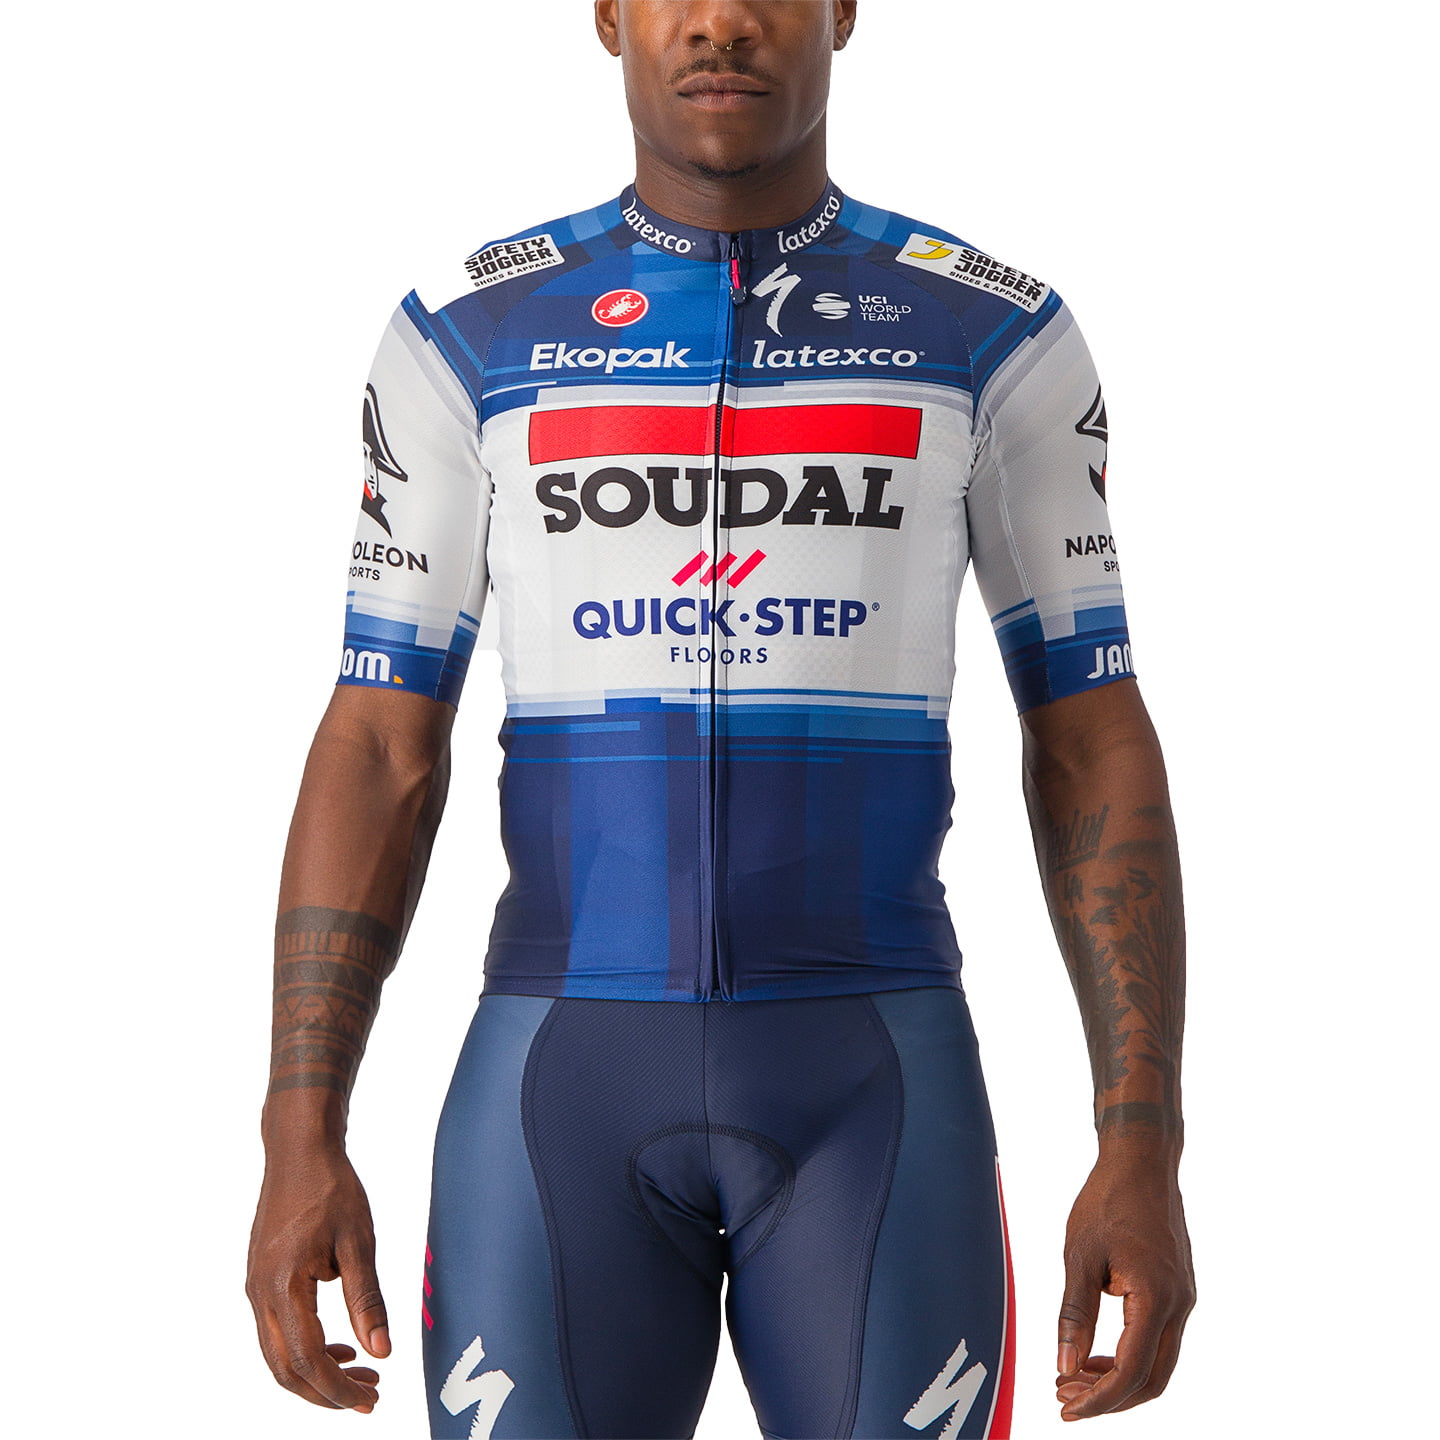 SOUDAL QUICK-STEP Aero Race 6.1 2023 Short Sleeve Jersey, for men, size S, Cycling jersey, Cycling clothing